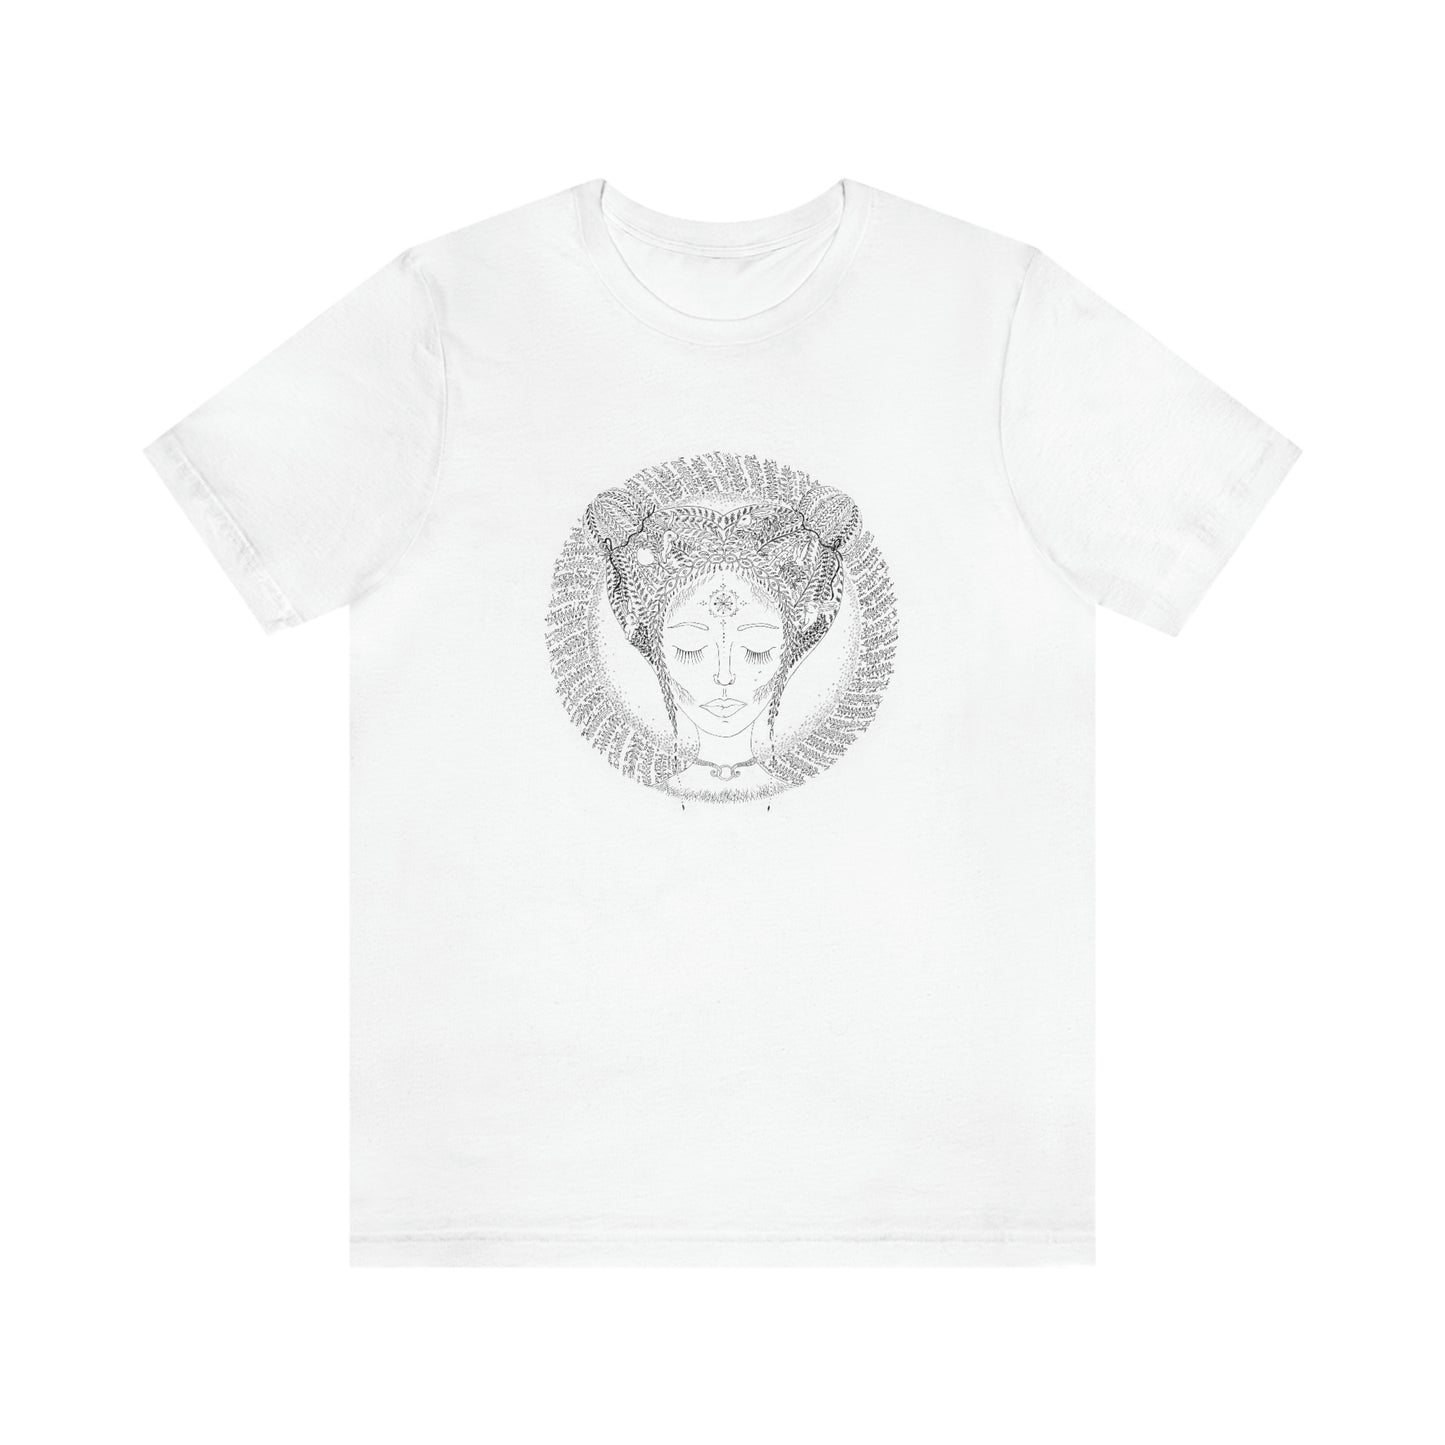 Chinese Zodiac Sign T Shirt (Rabbit) Unisex Regular Fit Limited Edition